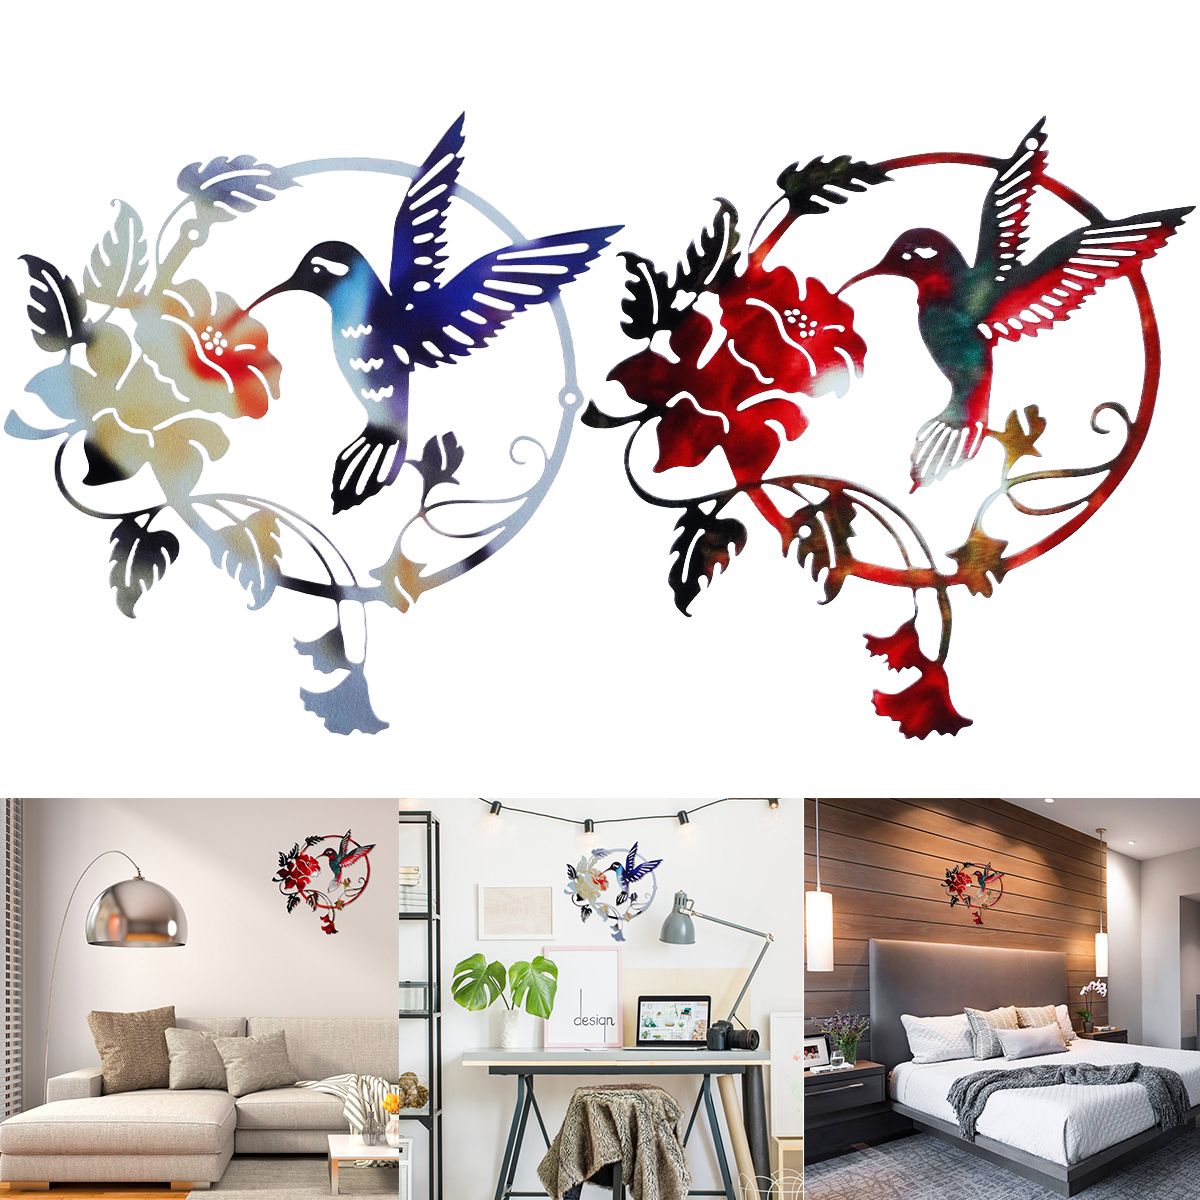 Welpettie Metal Hummingbird Wall Art Decor Metal Colorful Birds 3d Outdoor  Sculpture Iron Outdoor Hanging Decor Ornaments Metal Hand Made Bird Wall Art  Fence Decorations For Living Room Patio Balcony – Walmart With Current 3d Metal Colorful Birds Sculptures (View 19 of 20)